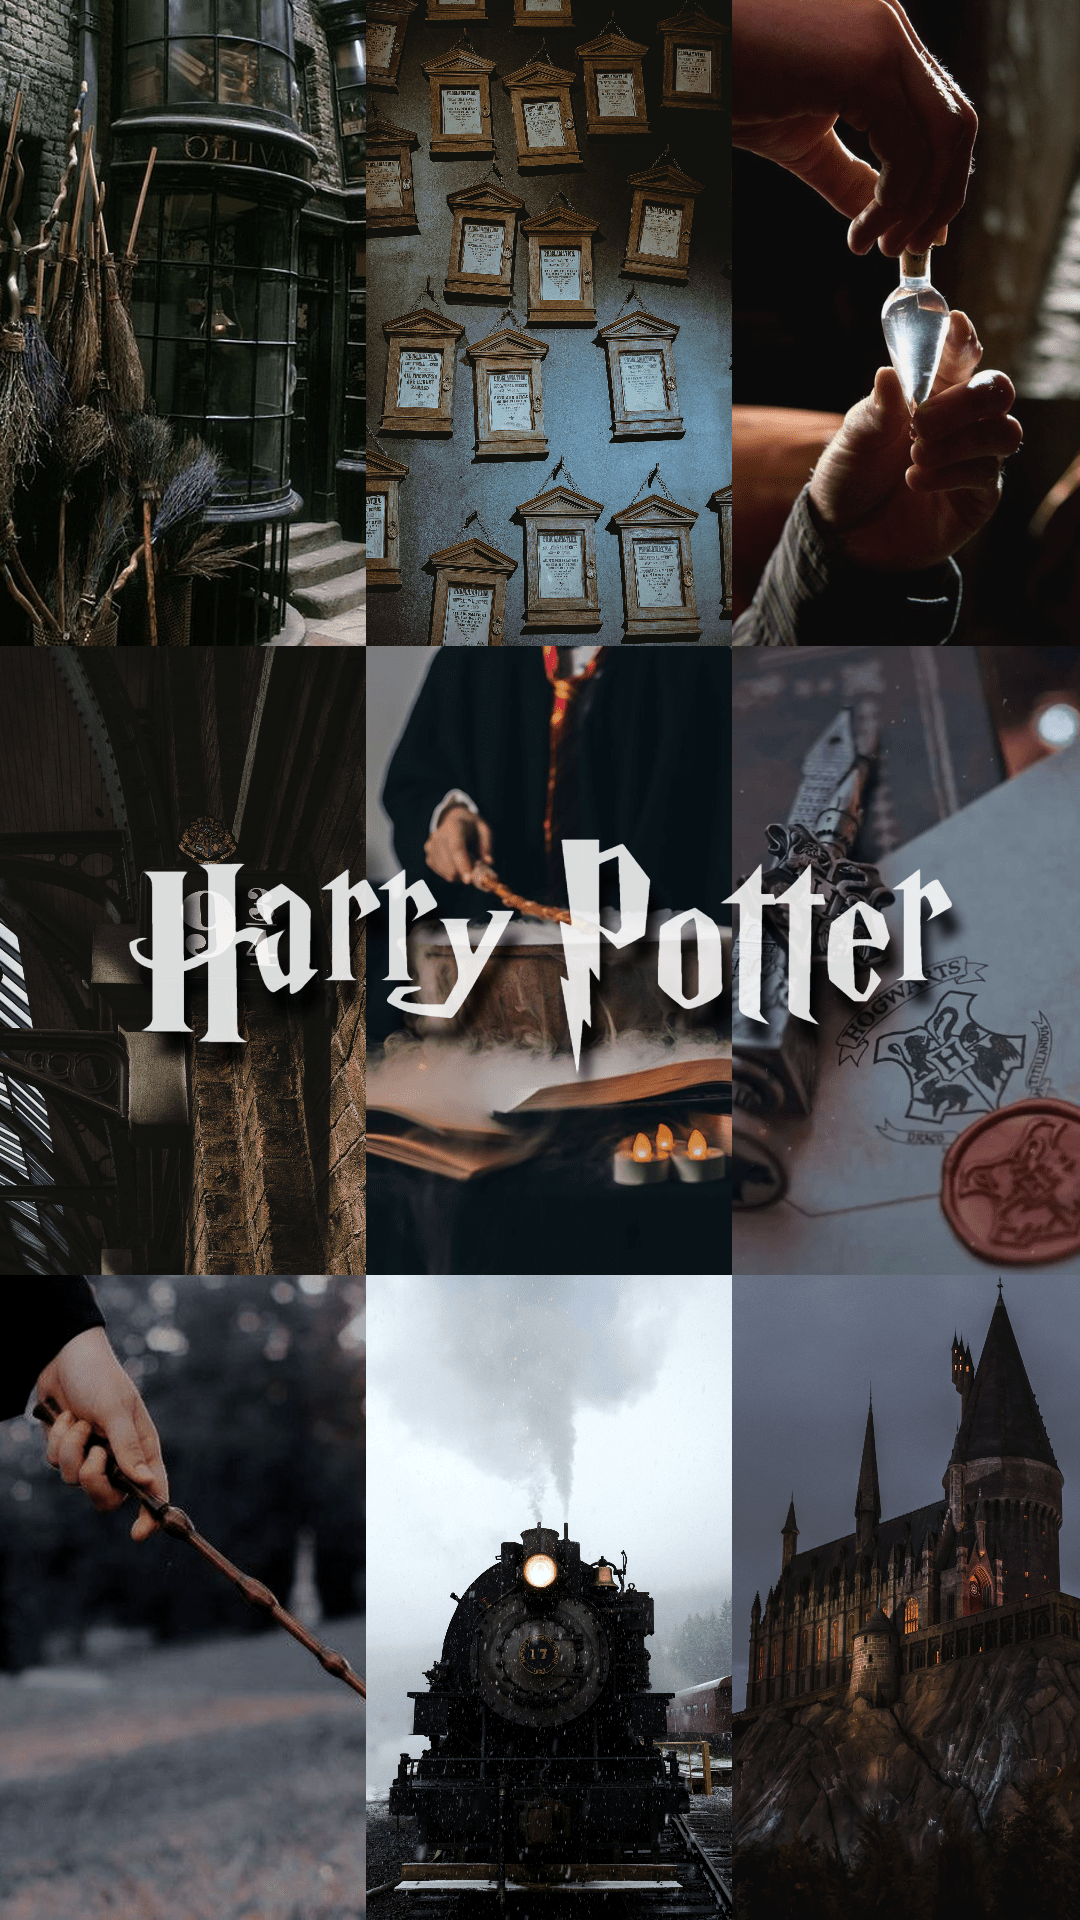 A collage of Harry Potter images including Hogwarts, a wand, and a train. - Harry Potter